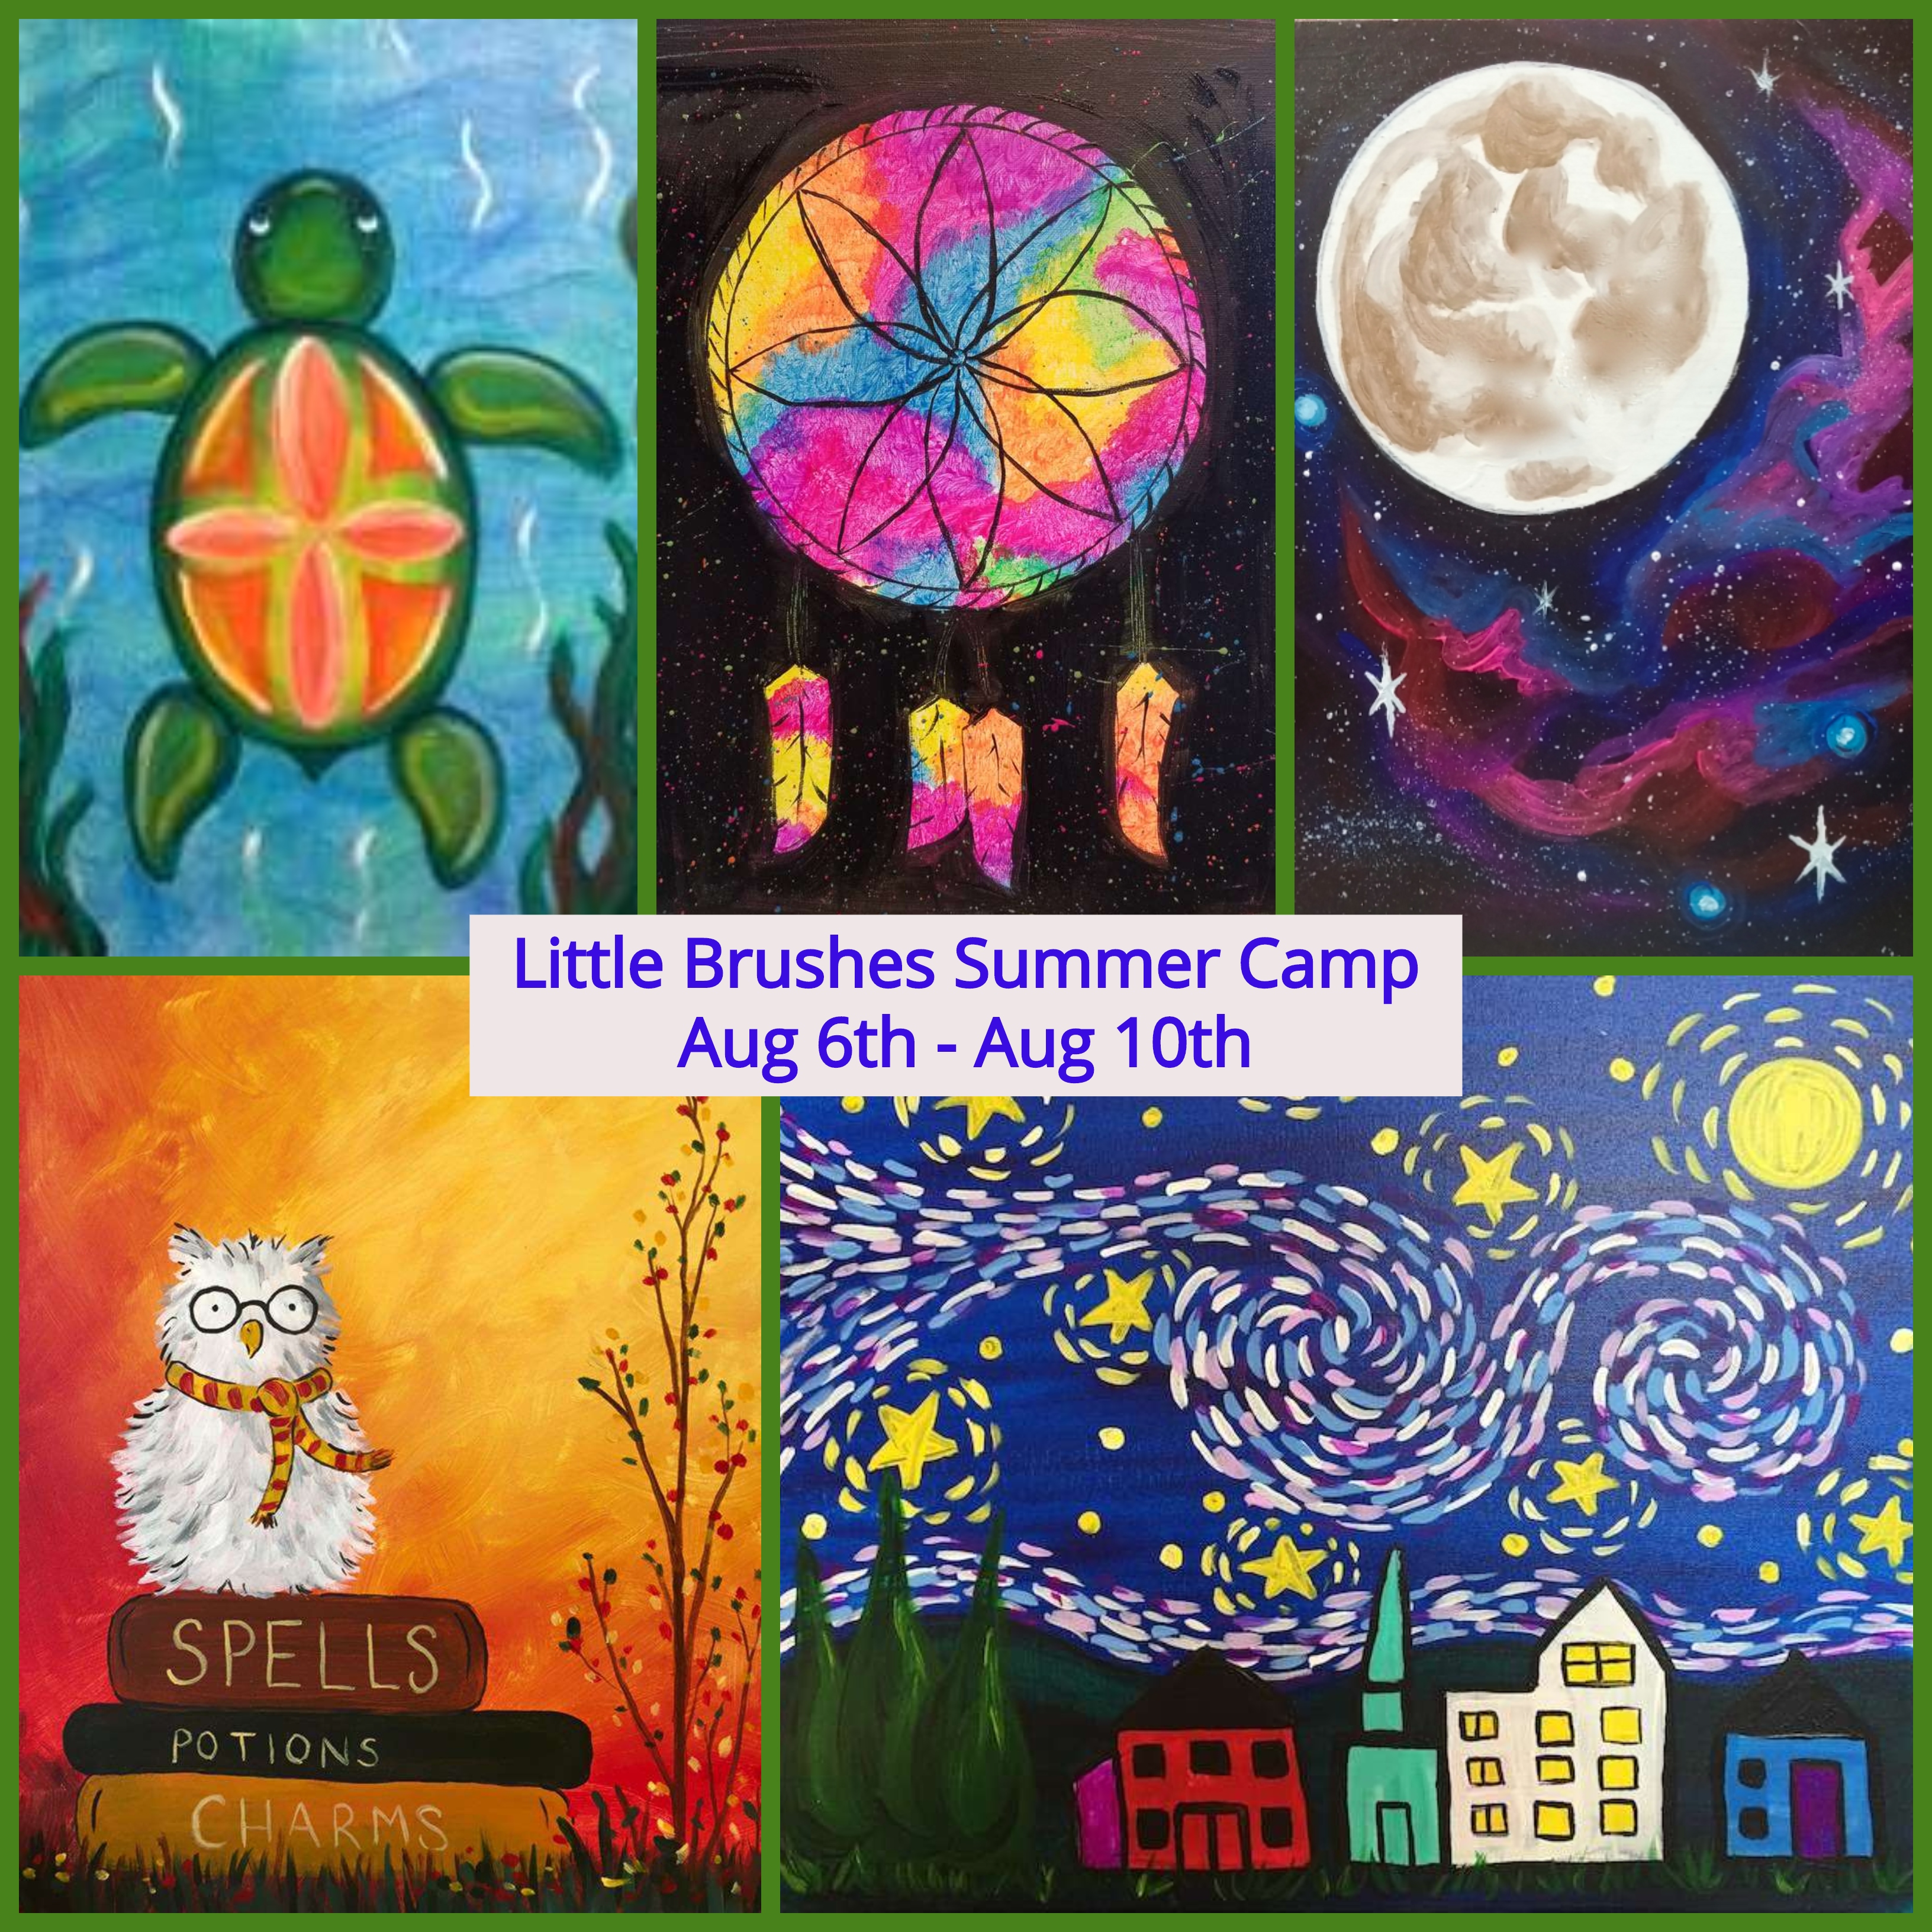 Summer Fun For The Kids! Art Camp for the Kids  Aug 6th - Aug 10th